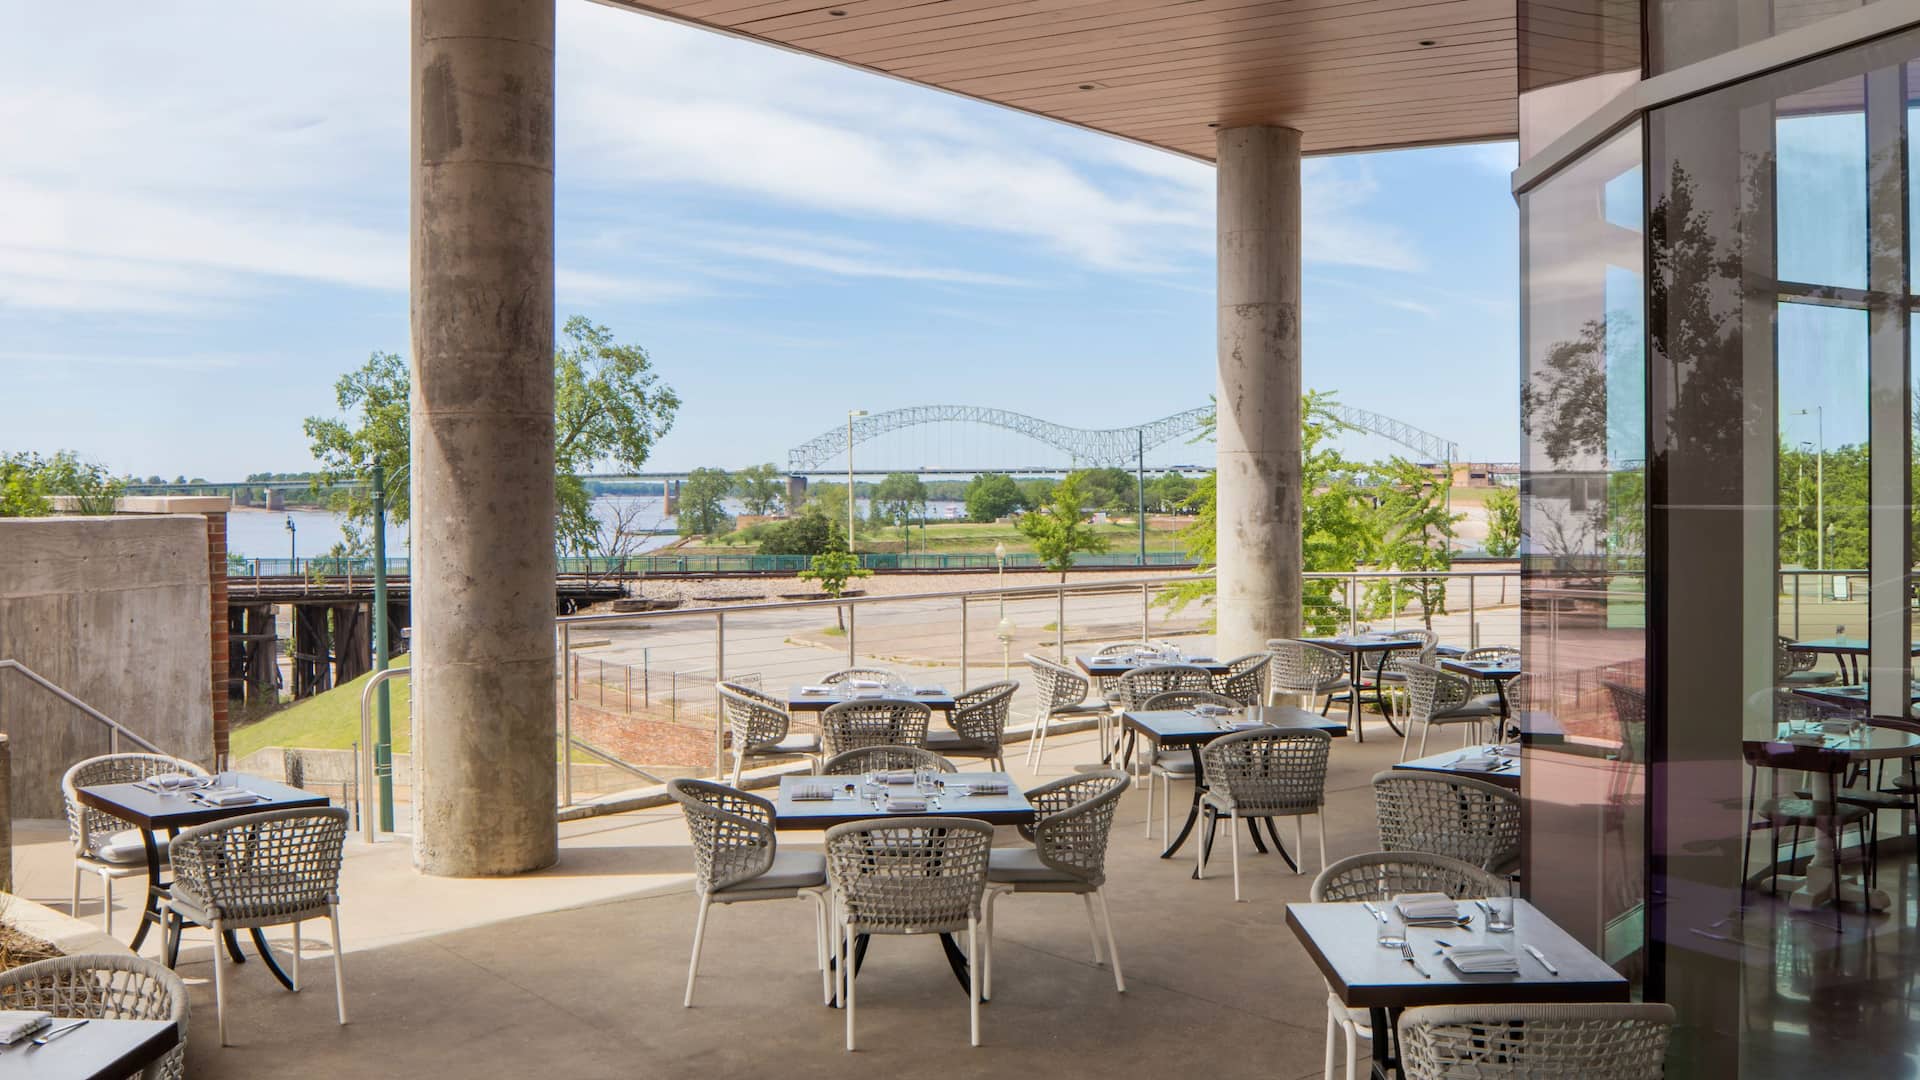 Patio dining area at a Downtown Memphis hotel